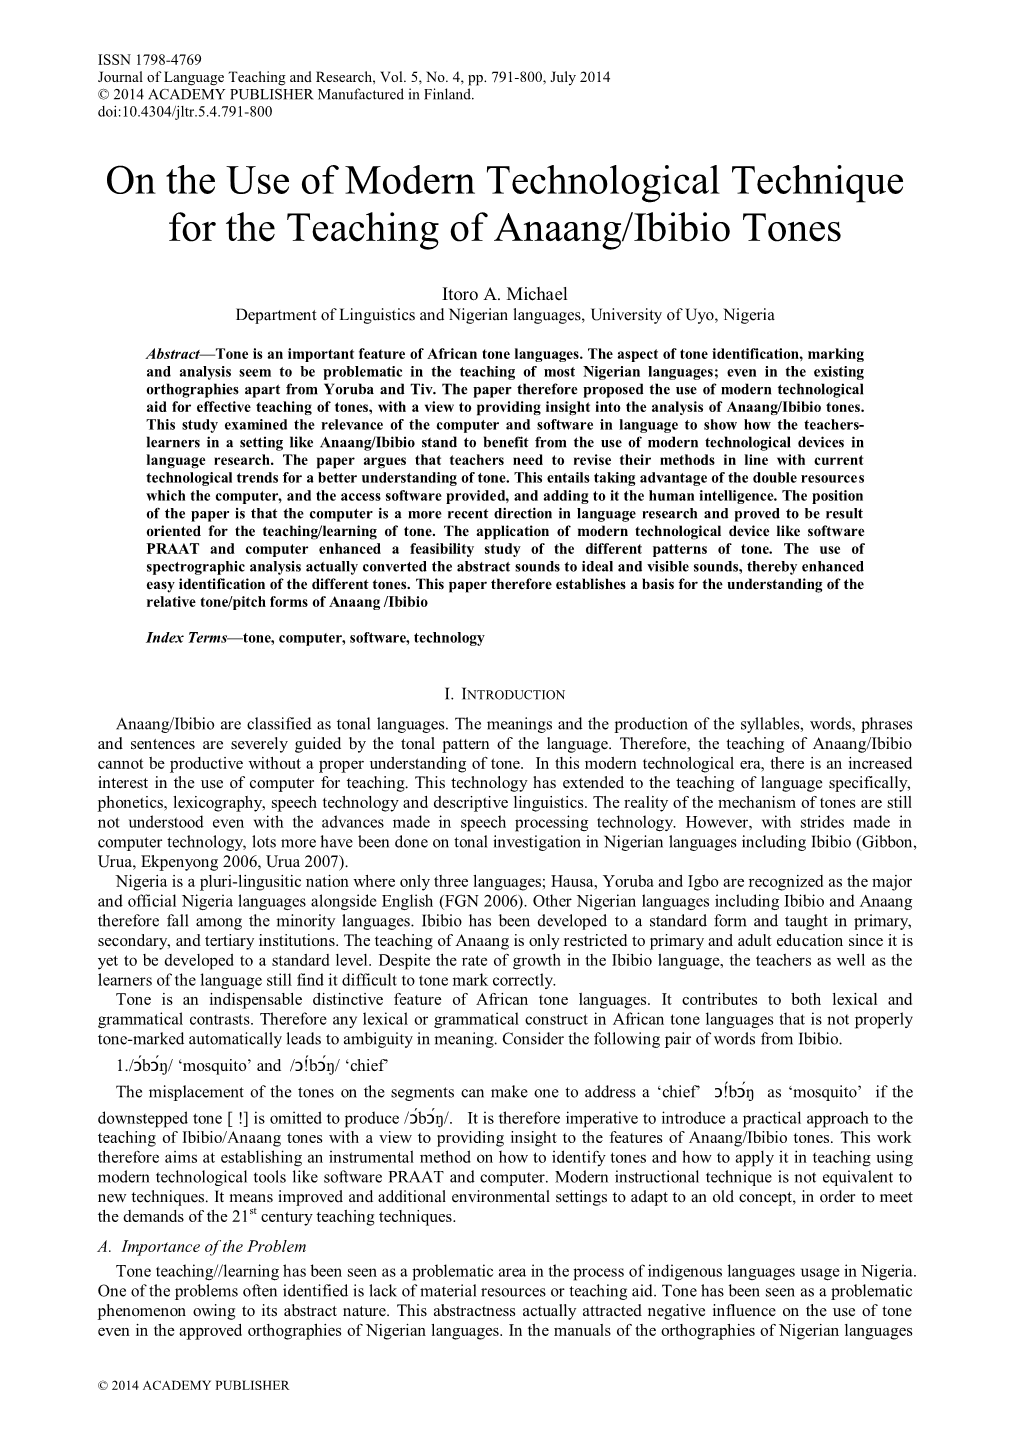 On the Use of Modern Technological Technique for the Teaching of Anaang/Ibibio Tones